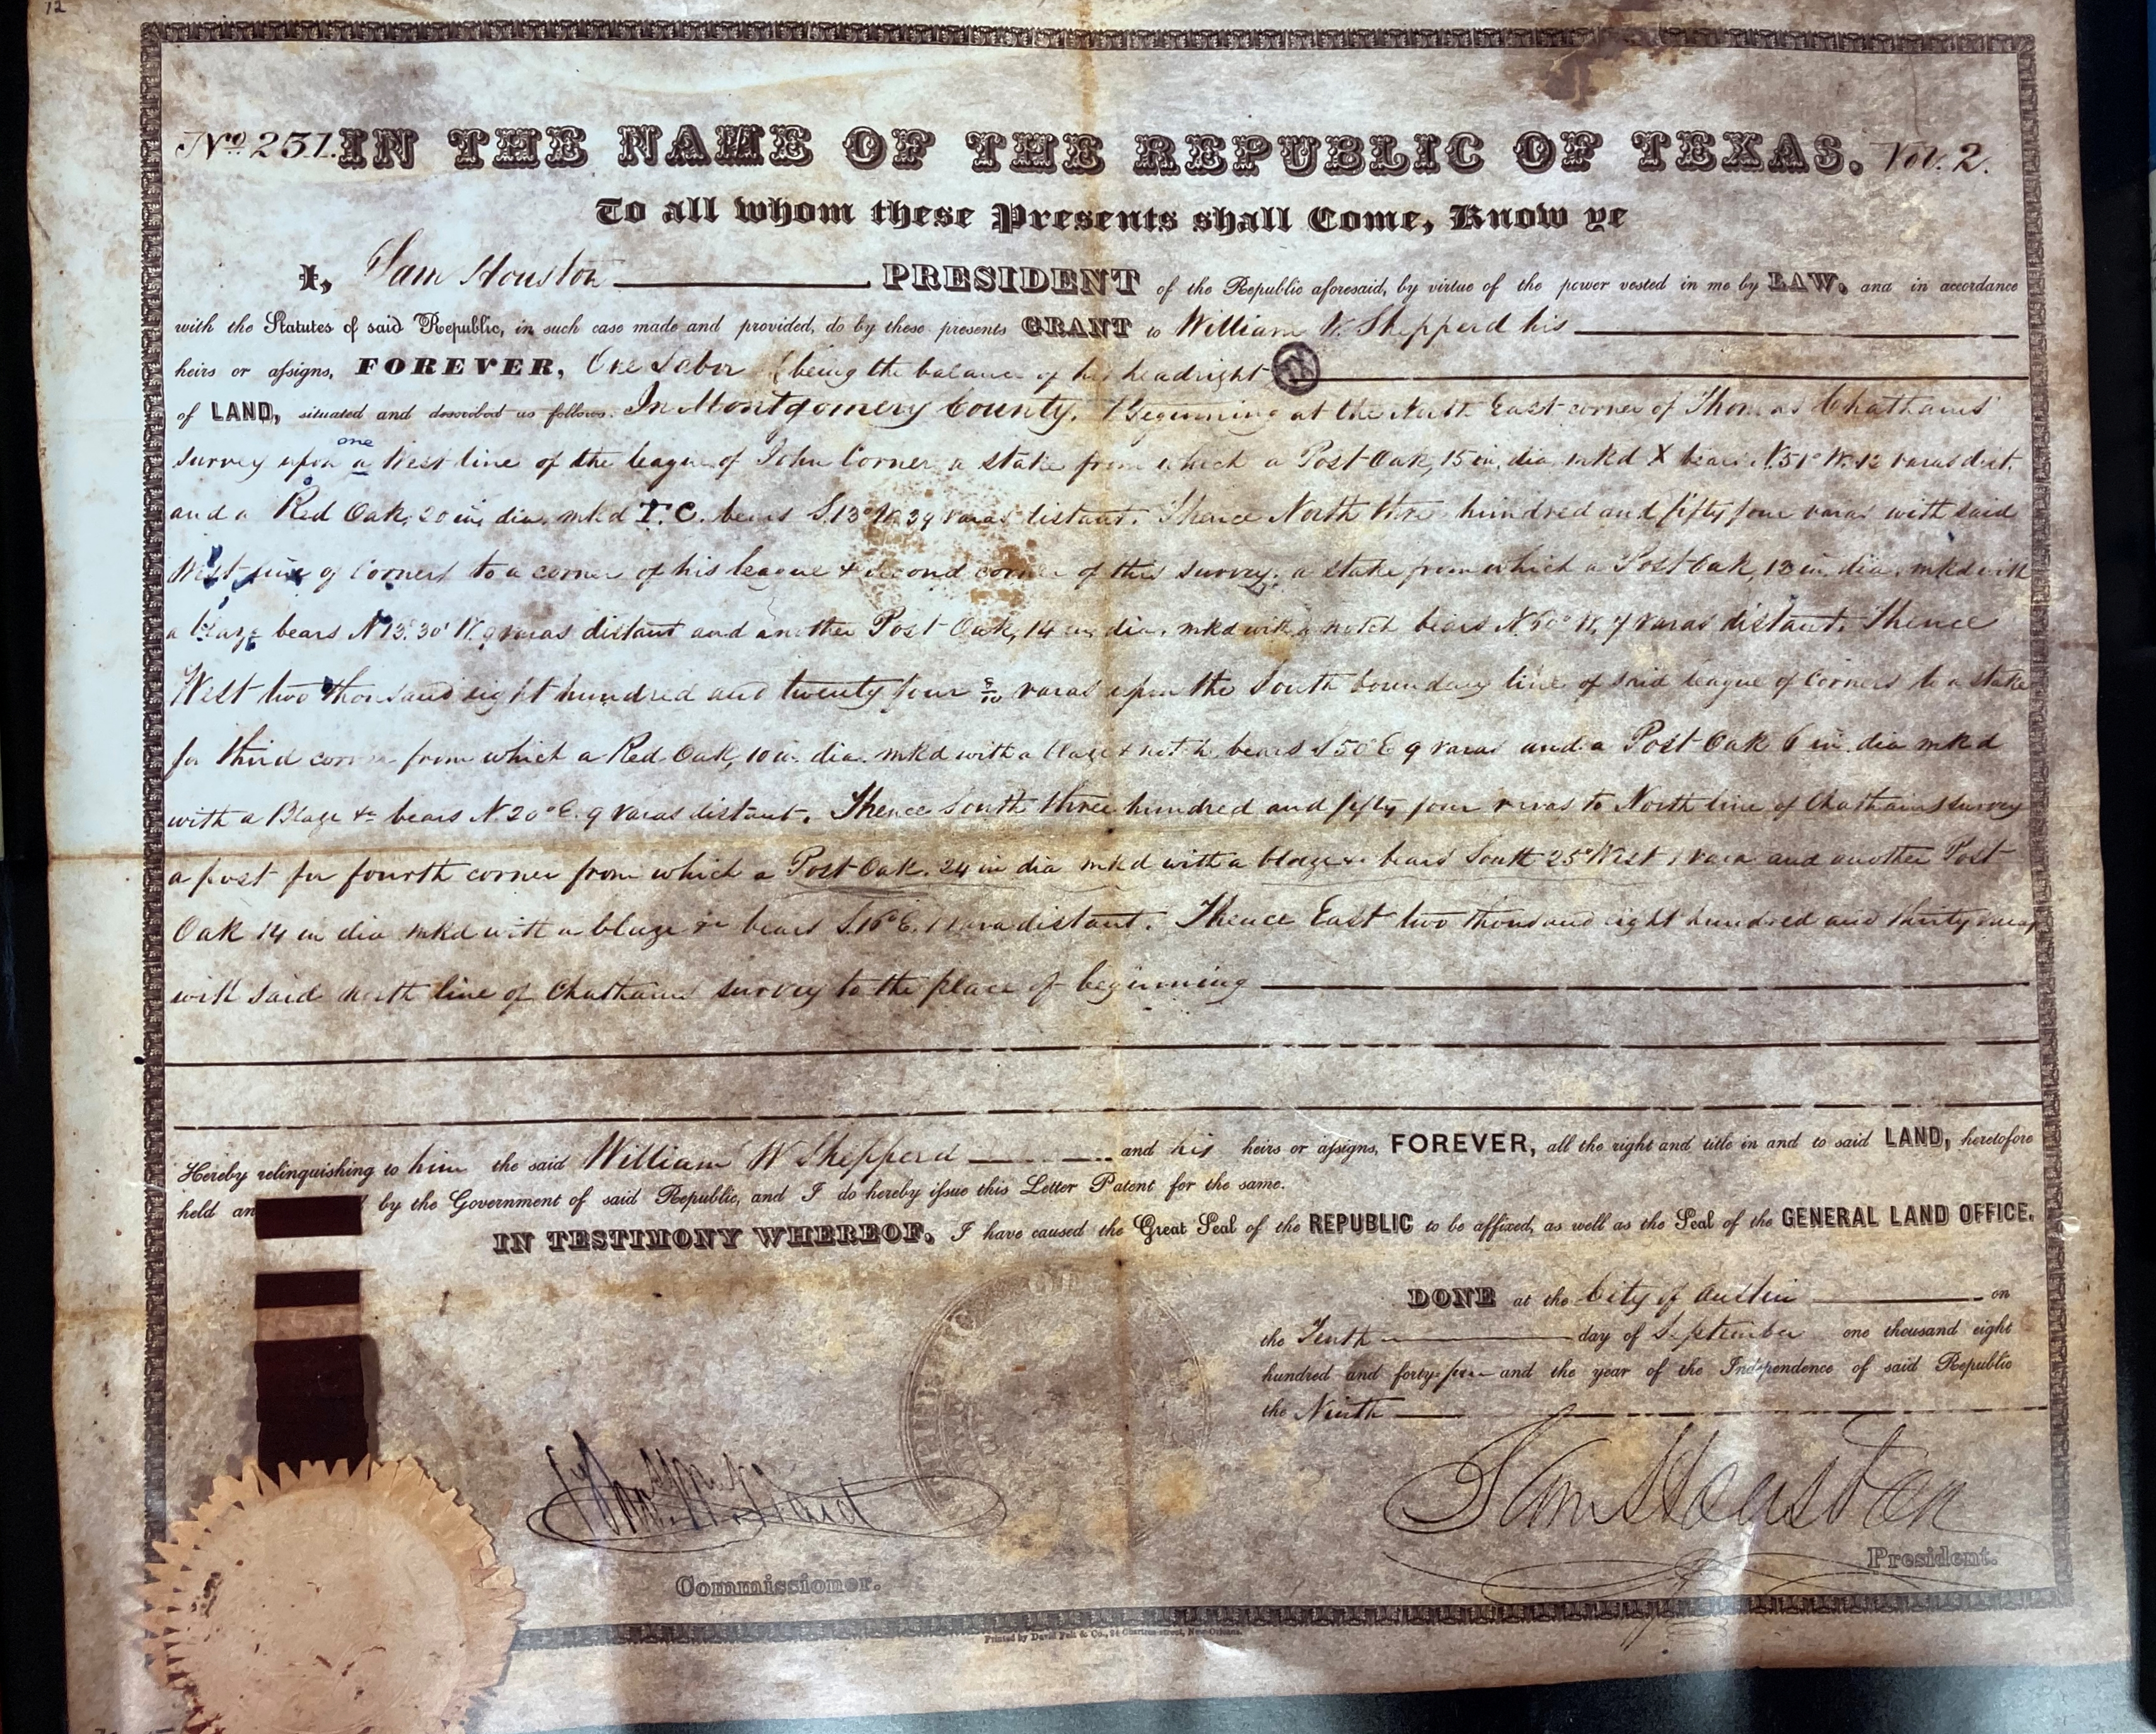 1844 Land Grant Certificate to W. W. Shepperd signed by President Sam Houston